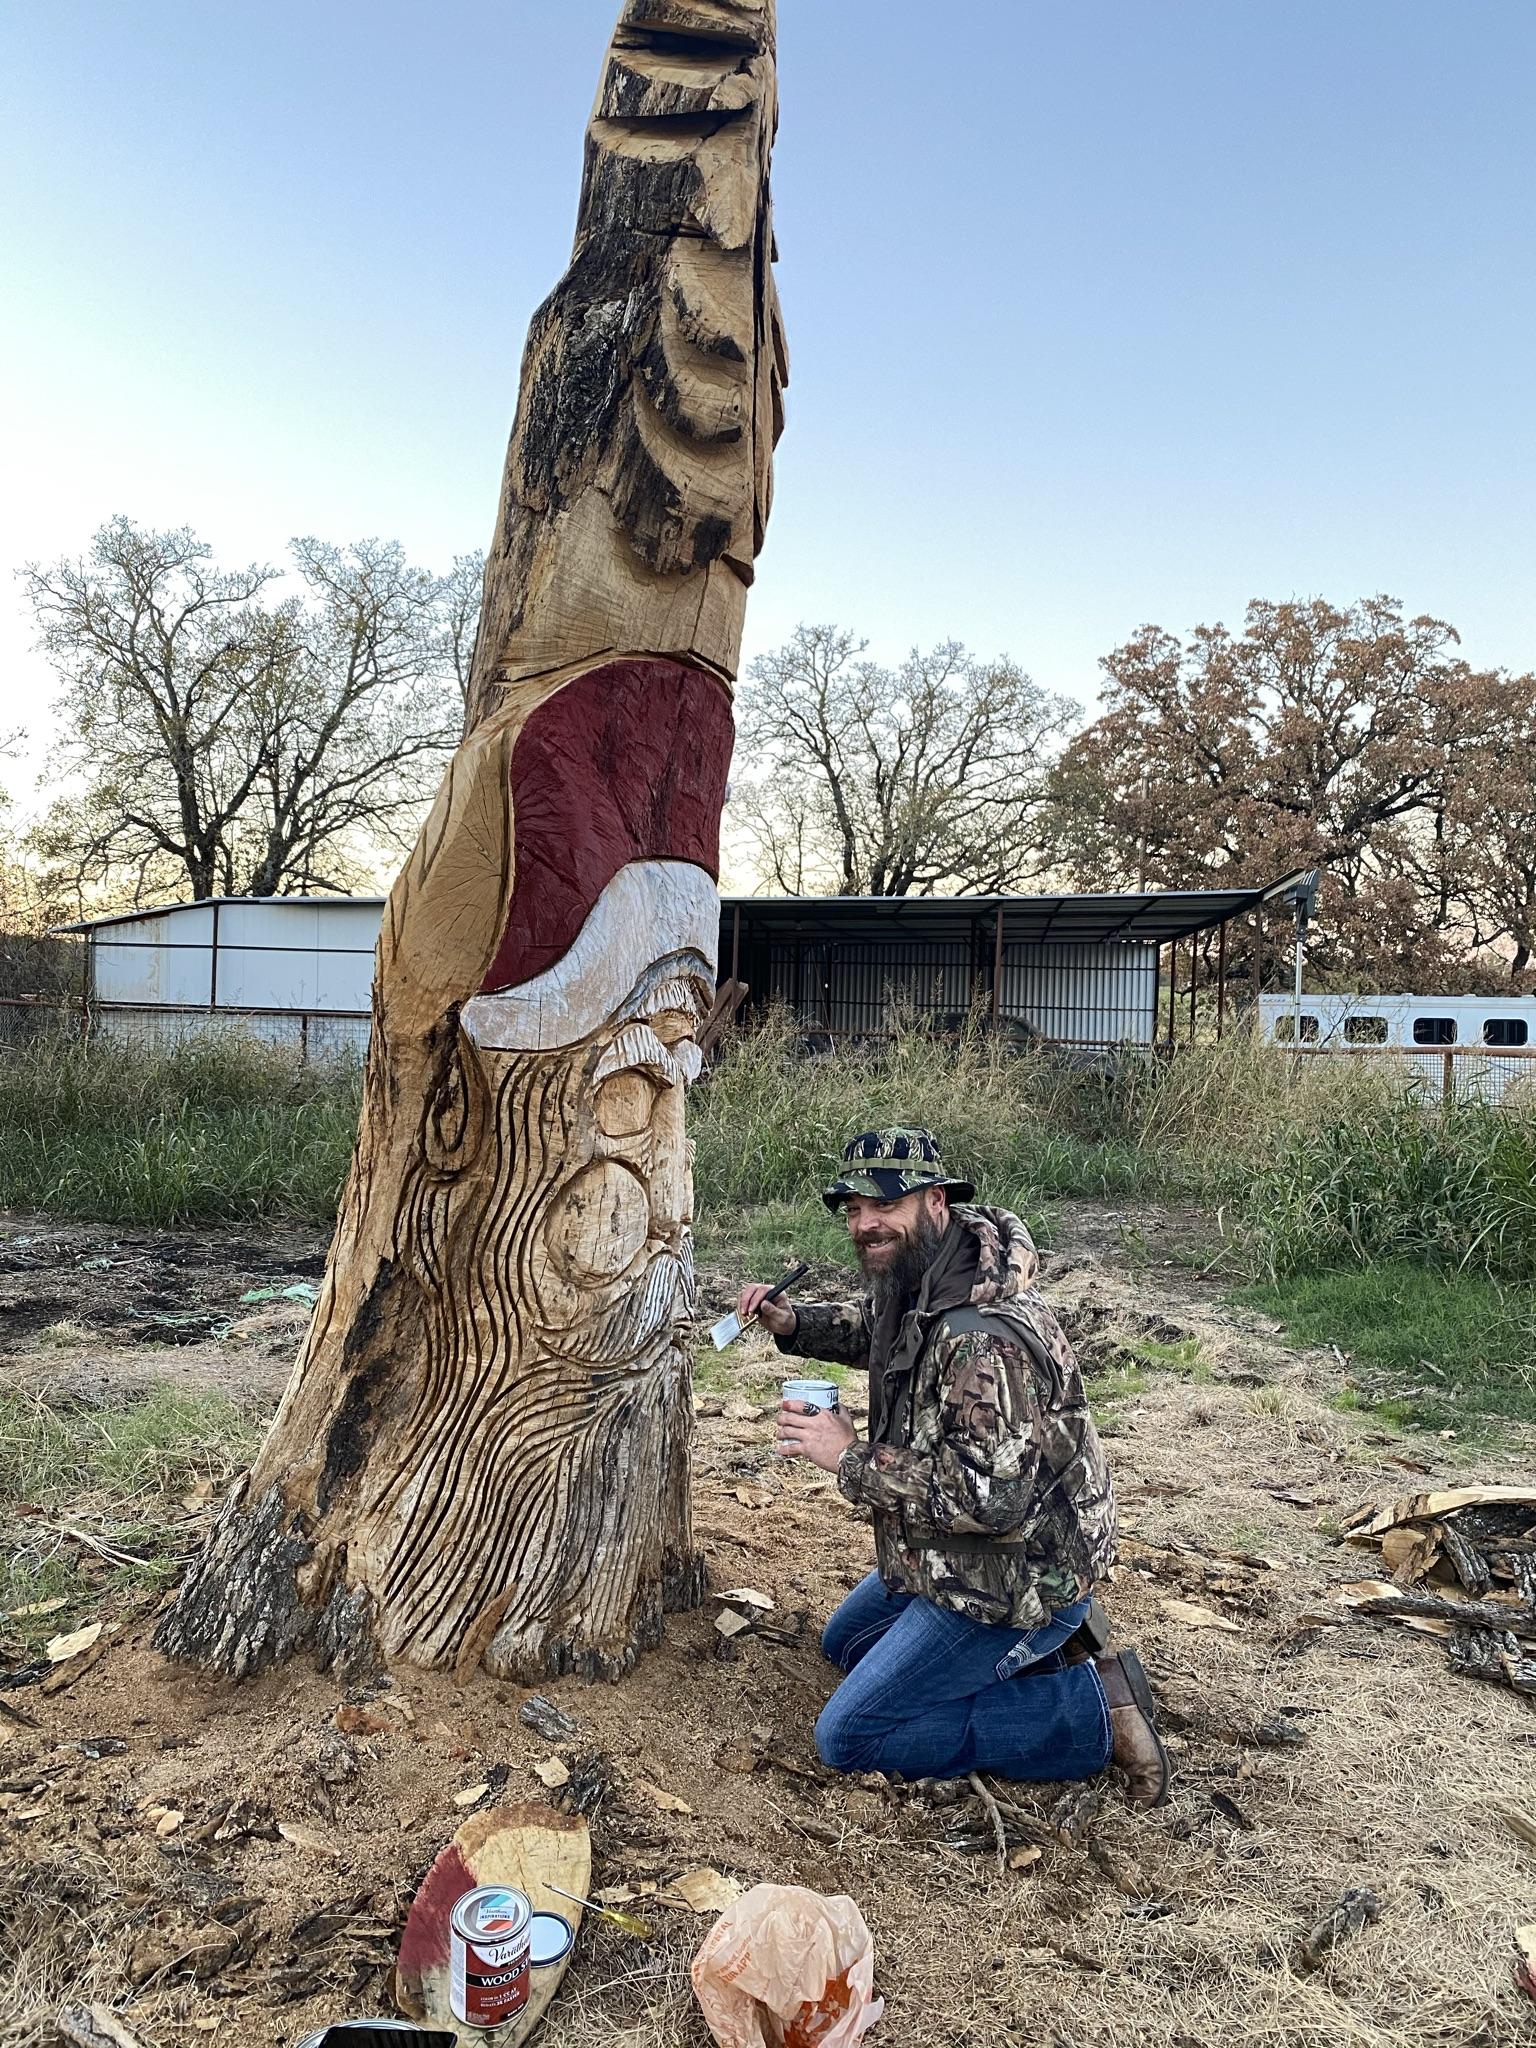 A man painting on a carved Santa in an old tree for the Christmas tree season at Haynie's Green Acres Christmas tree farm